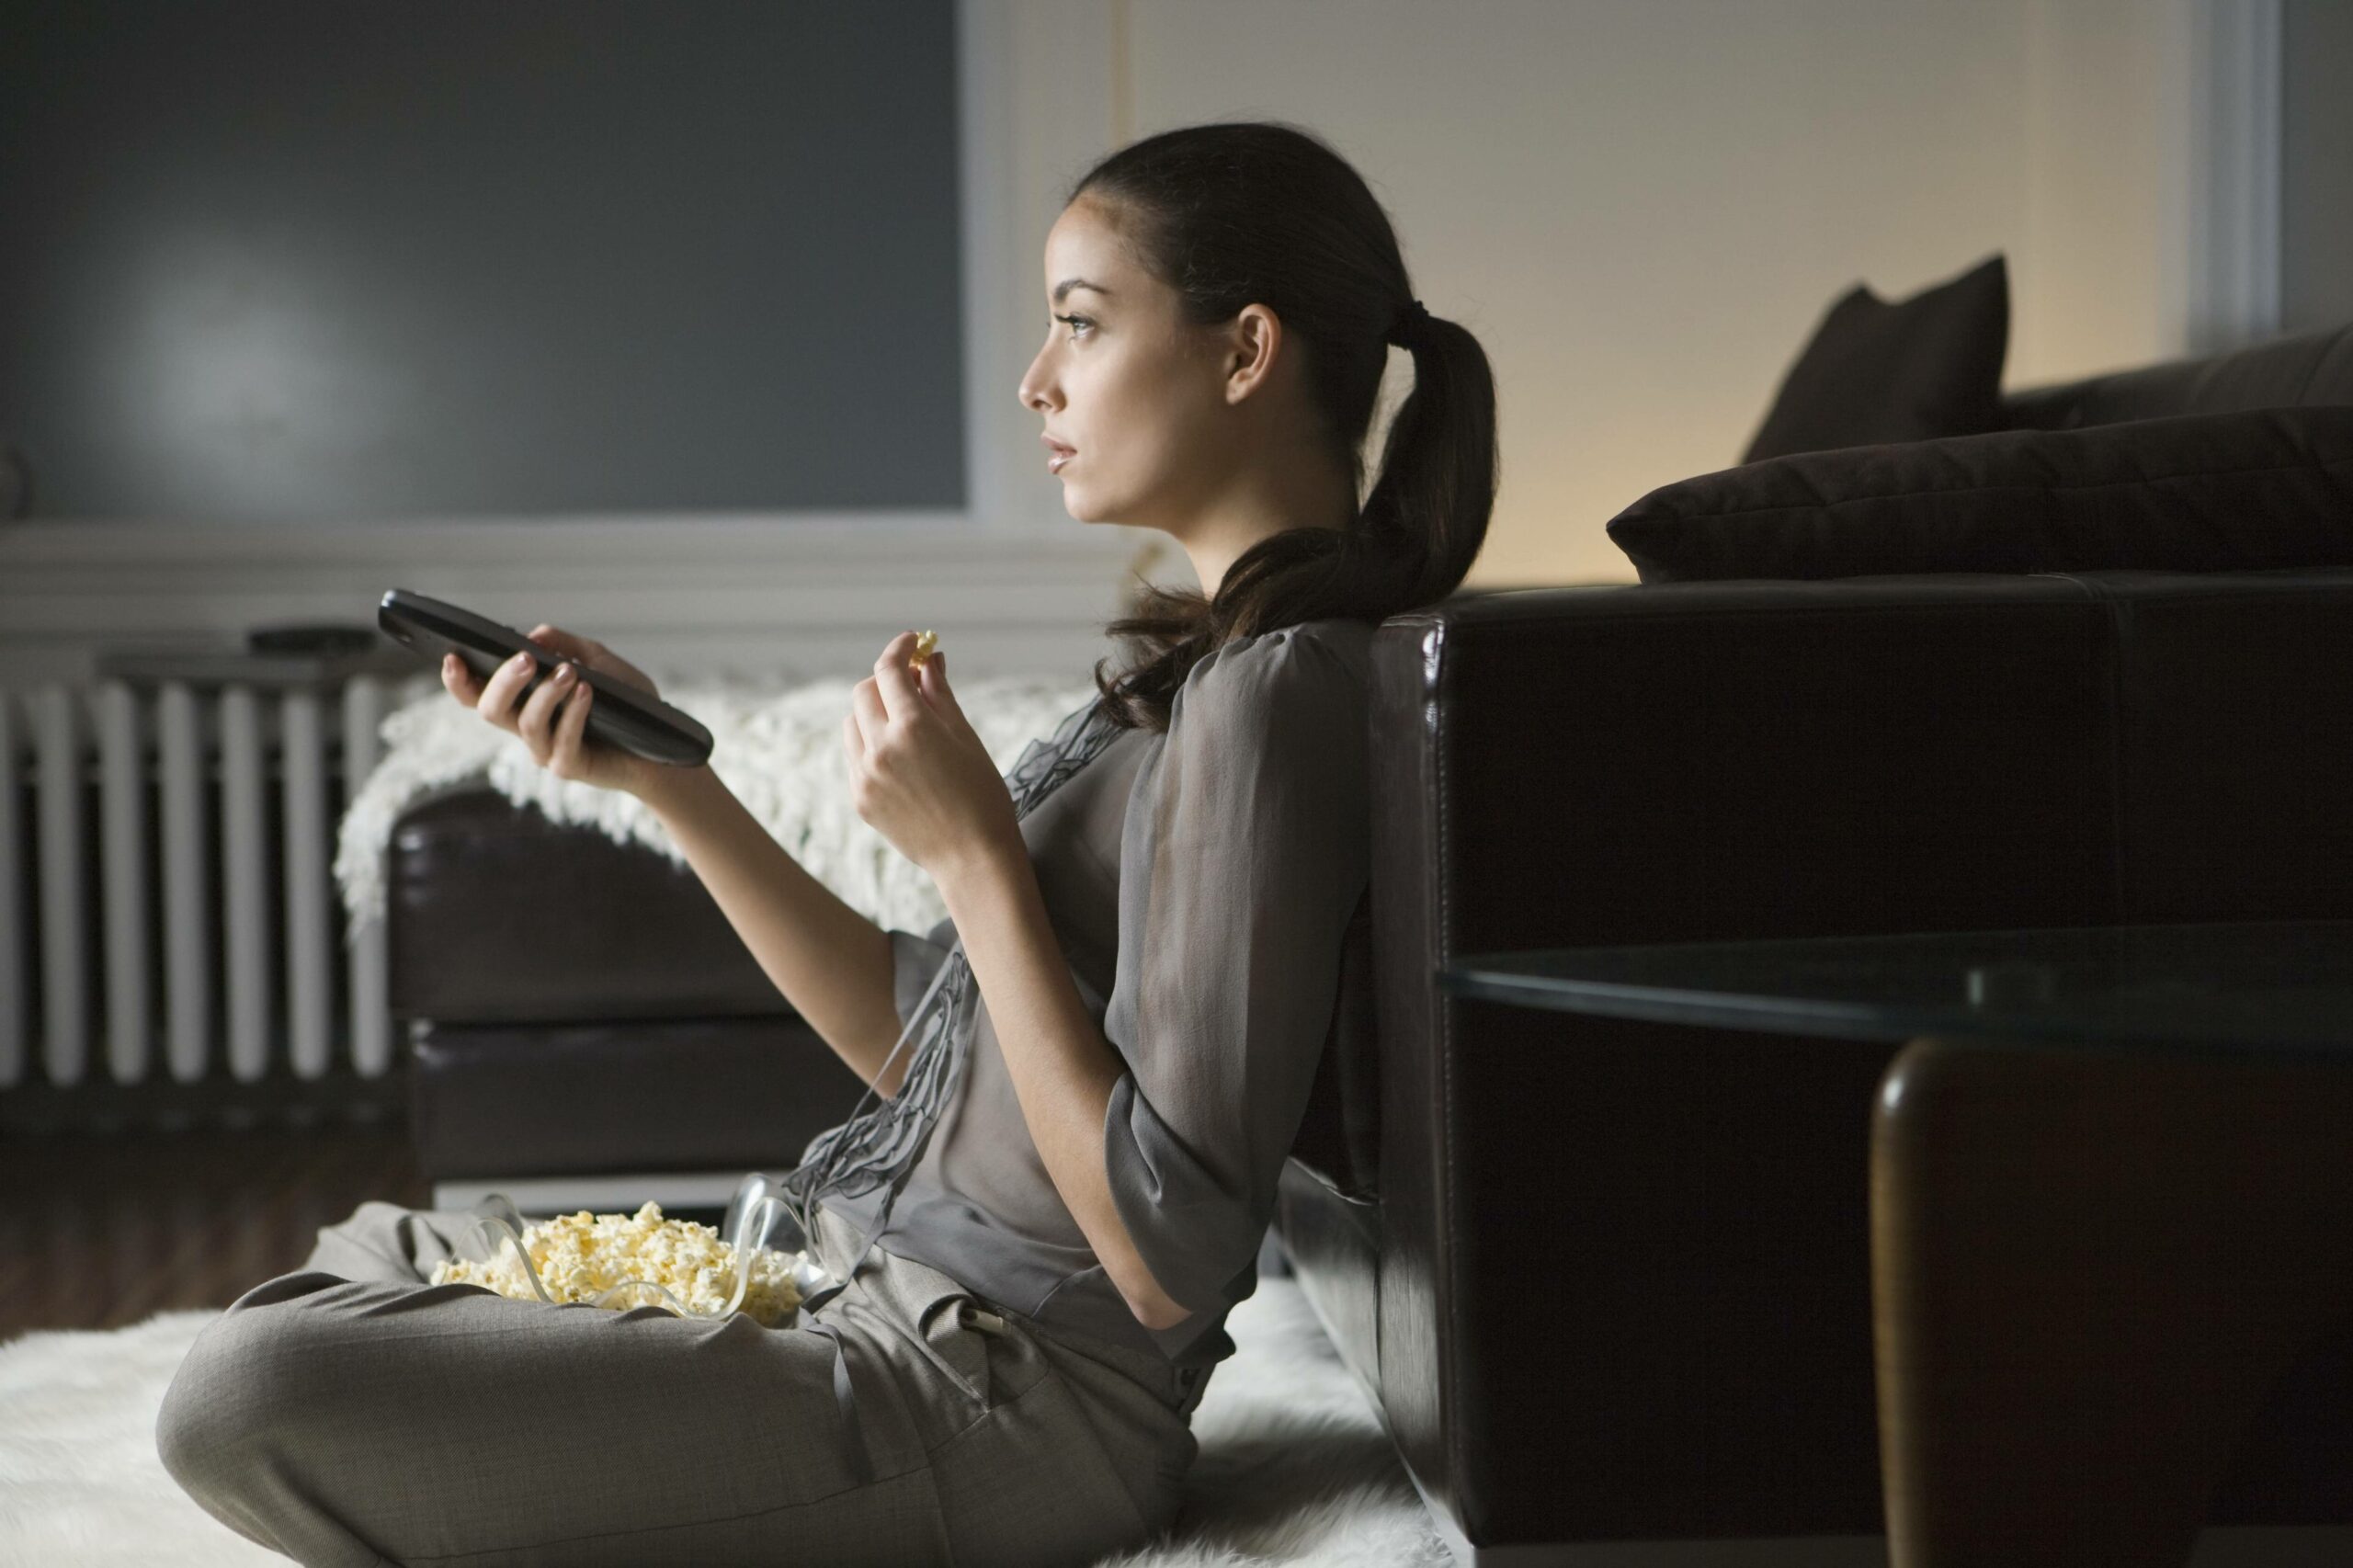 woman eating popcorn and watching tv